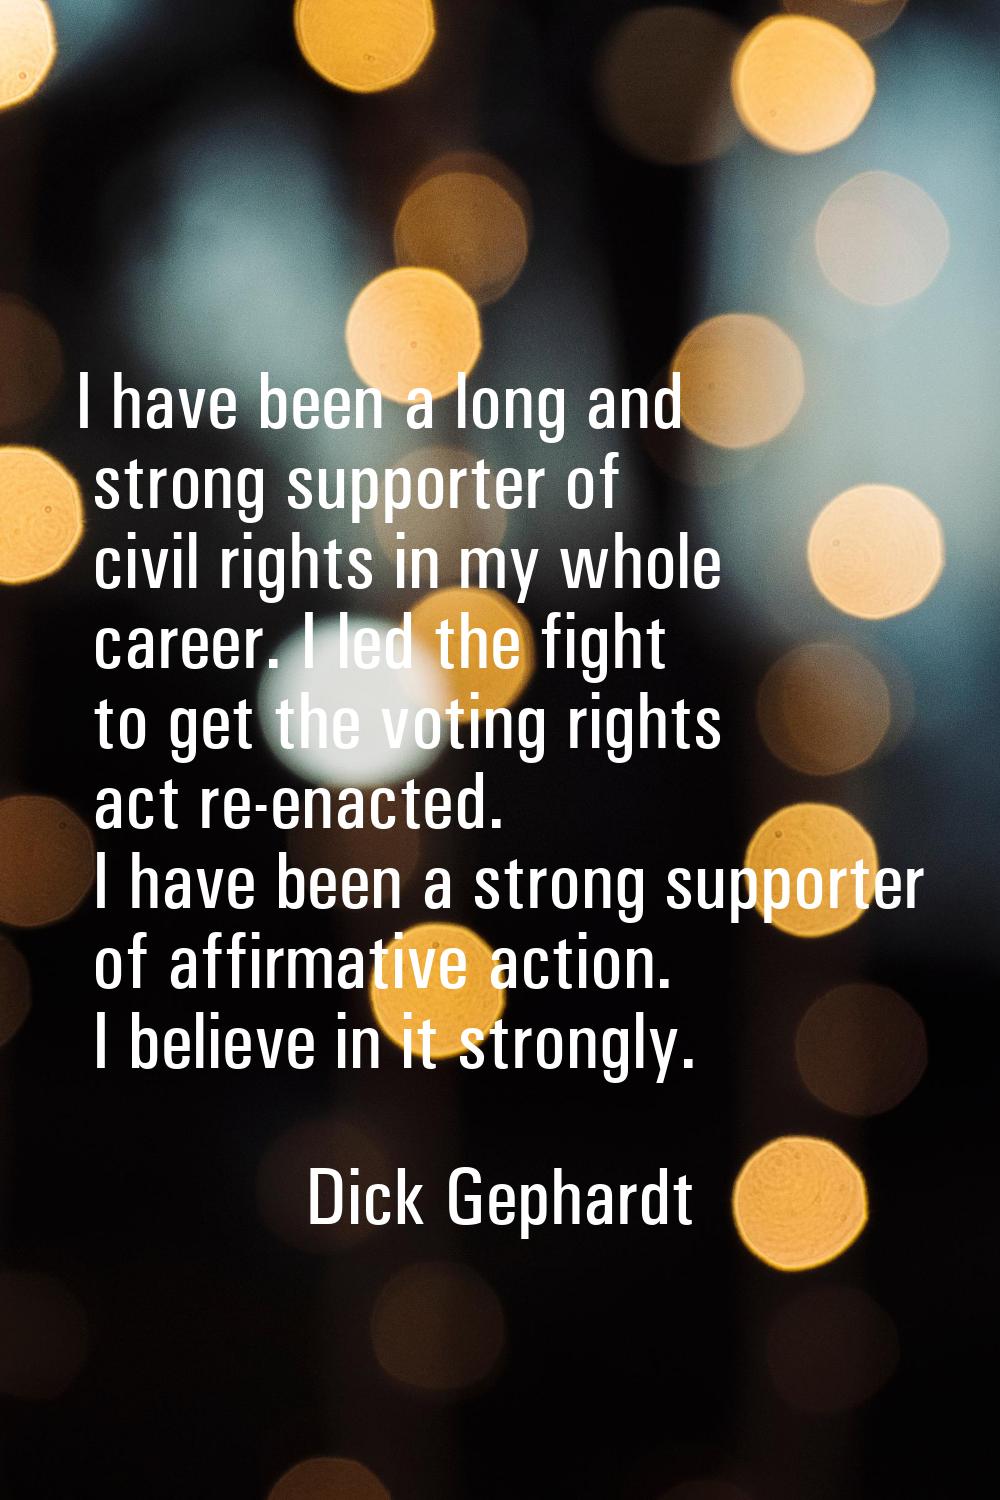 I have been a long and strong supporter of civil rights in my whole career. I led the fight to get 